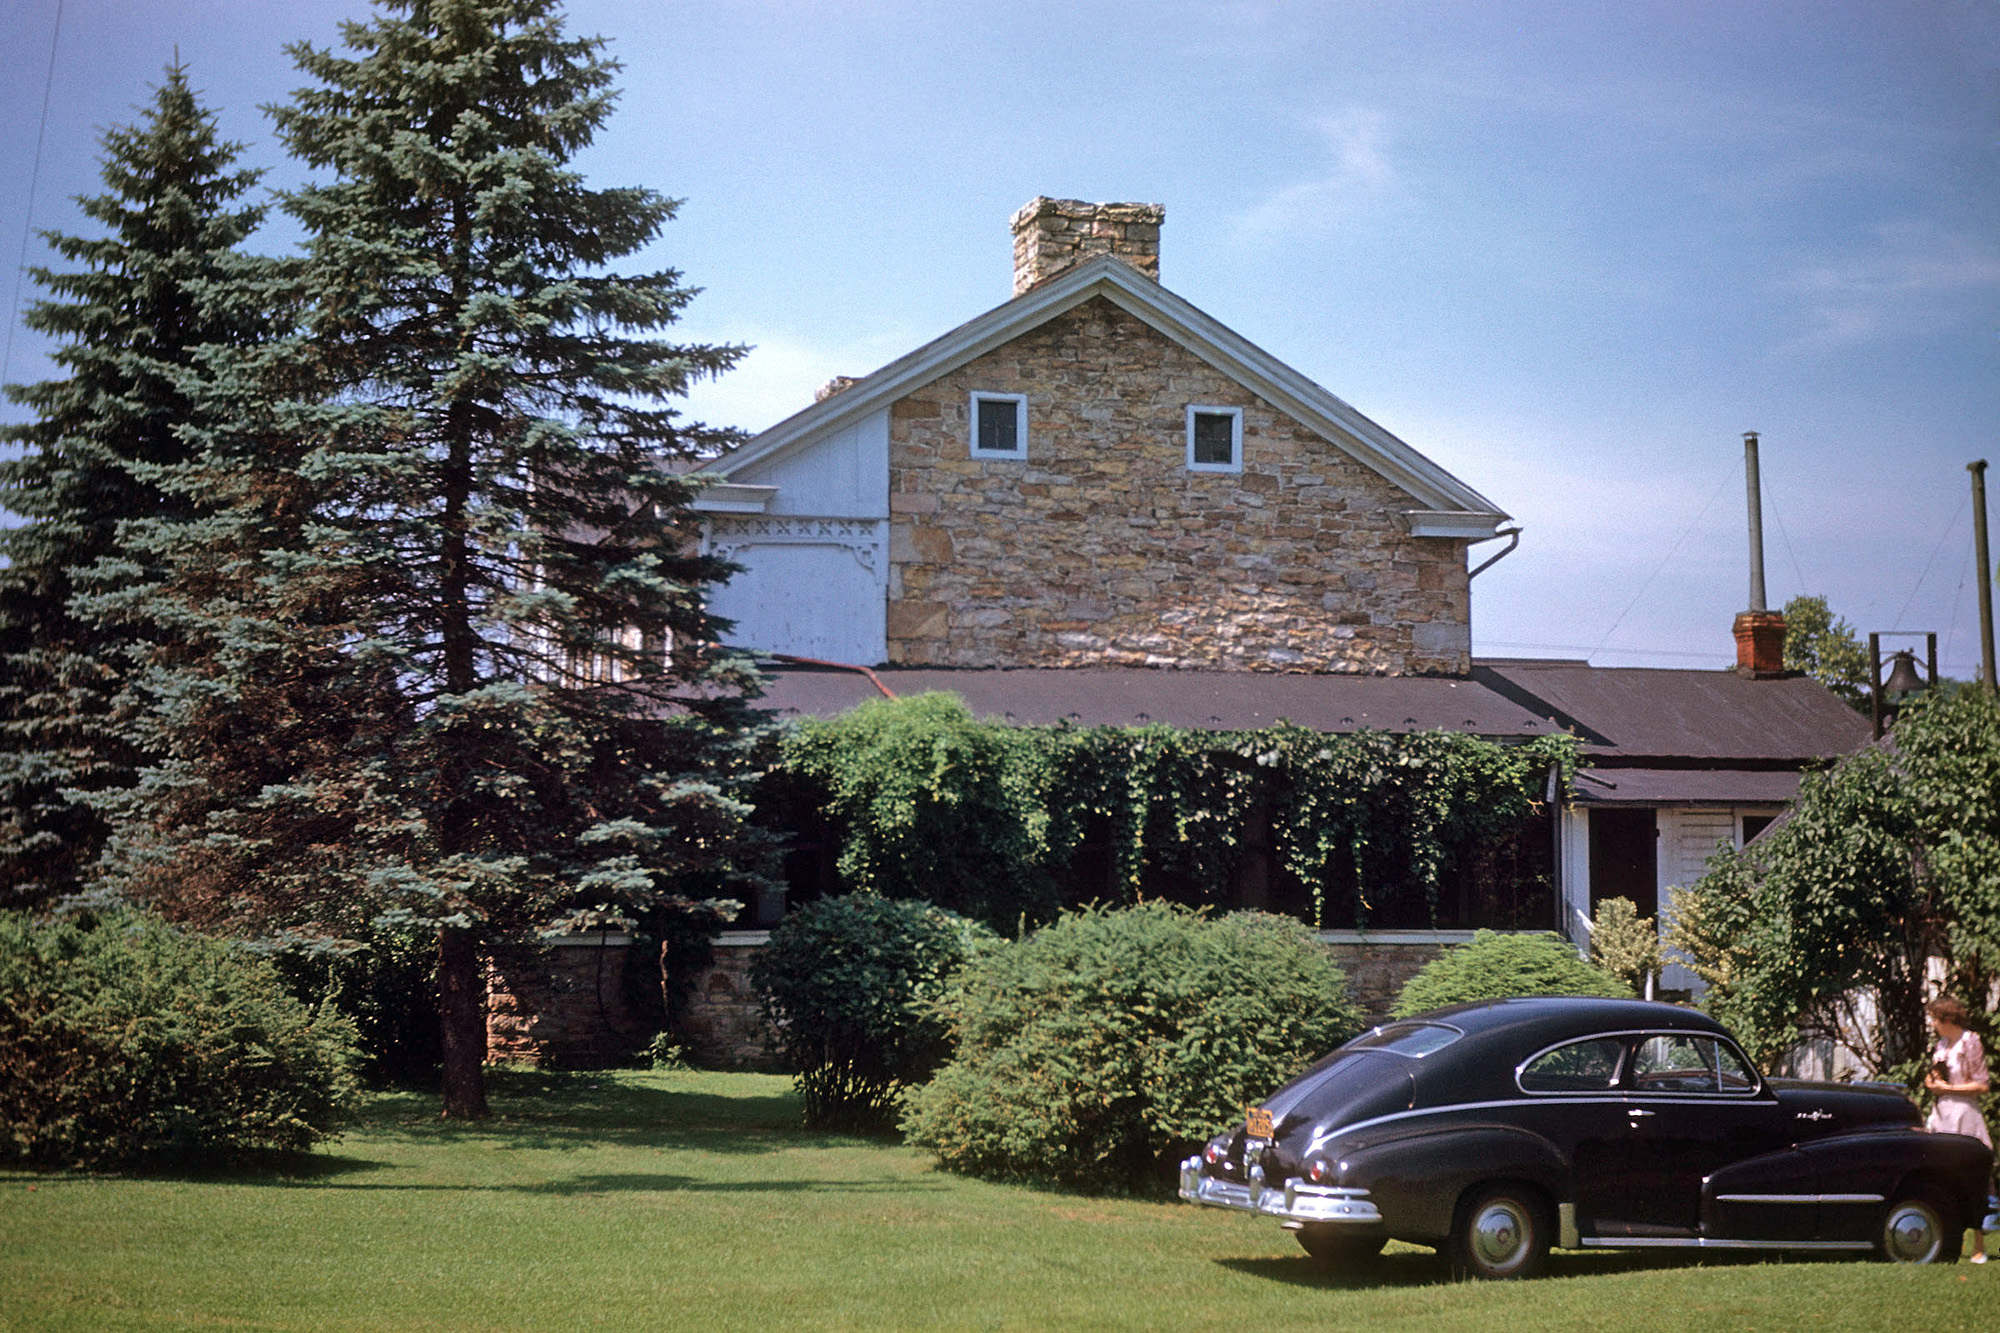 Another look at the grocery and family home in Honey Grove, Pennsylvania sometime before 1952. View full size.